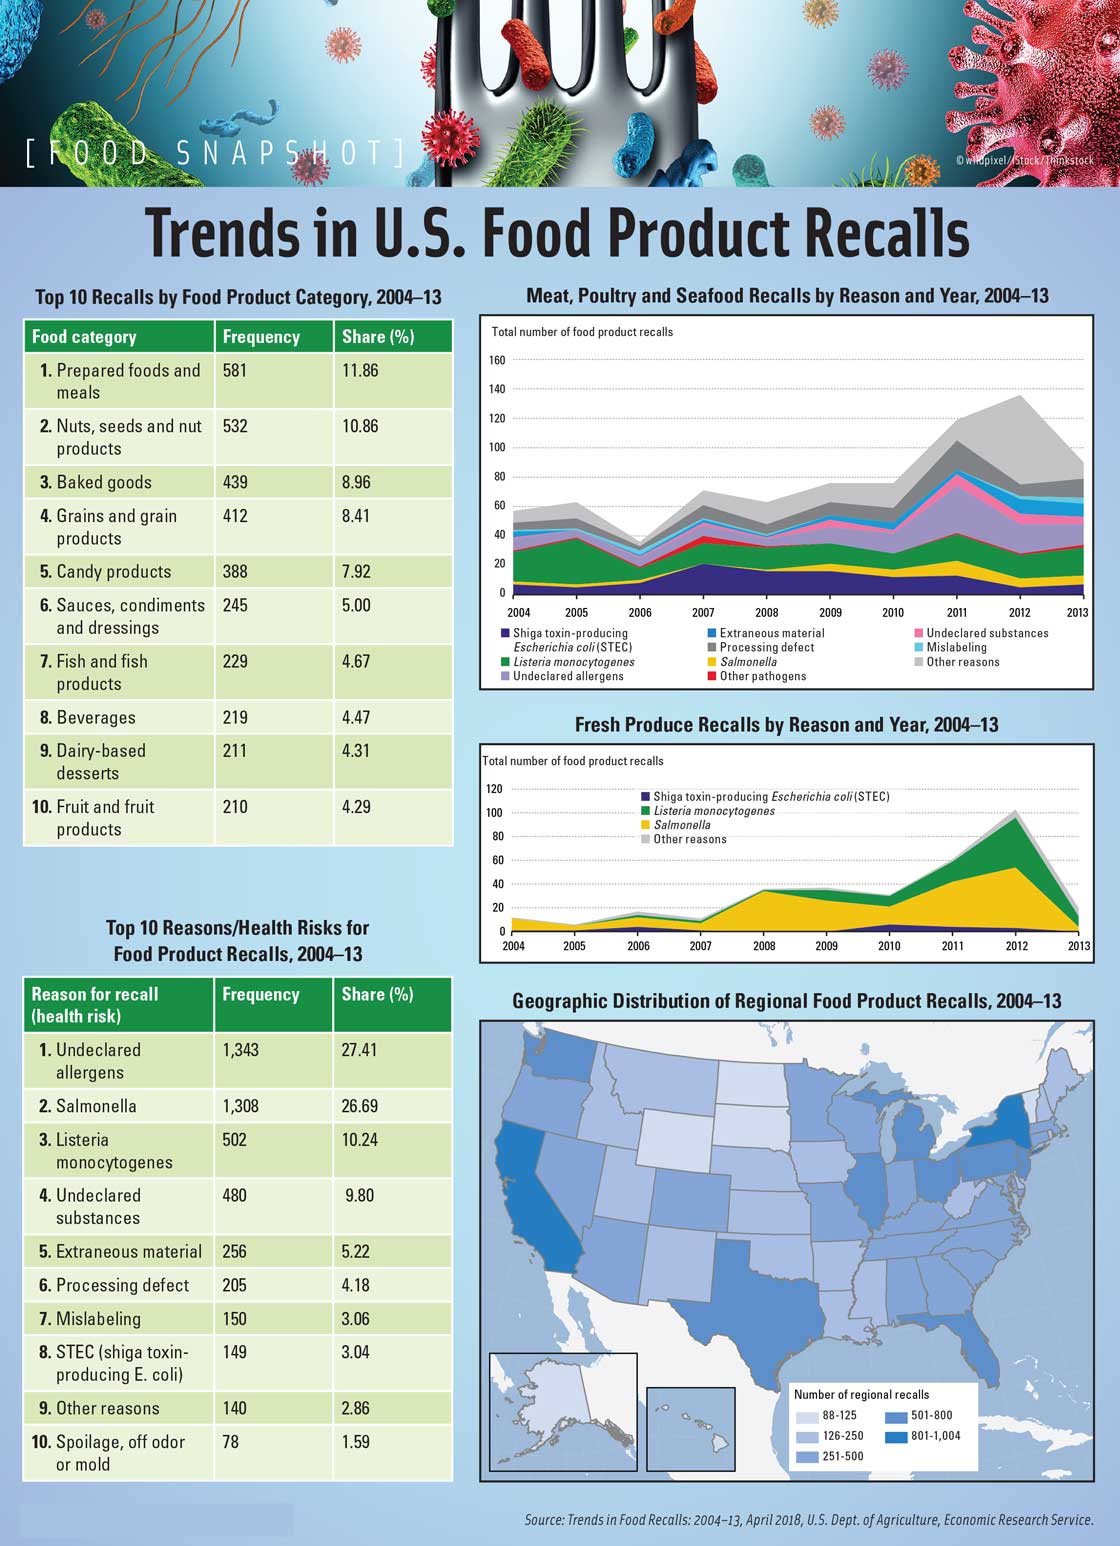 Trends in U.S. Food Product Recalls. Source: Trends in Food Recalls: 2004â€“13, April 2018, U.S. Dept. of Agriculture, Economic Research Service.